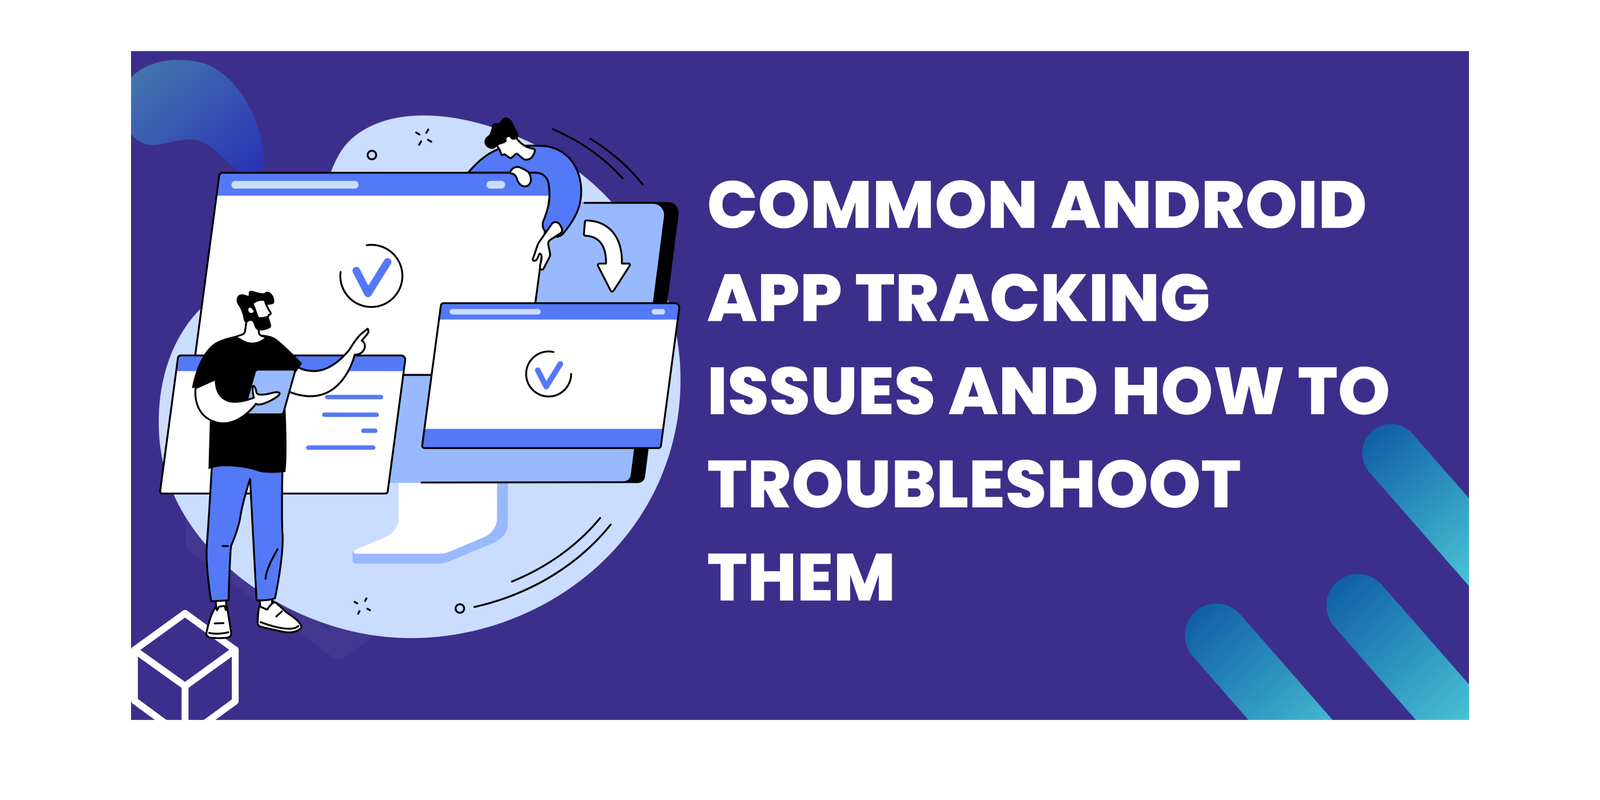 Common Android App Tracking Issues and How to Troubleshoot Them